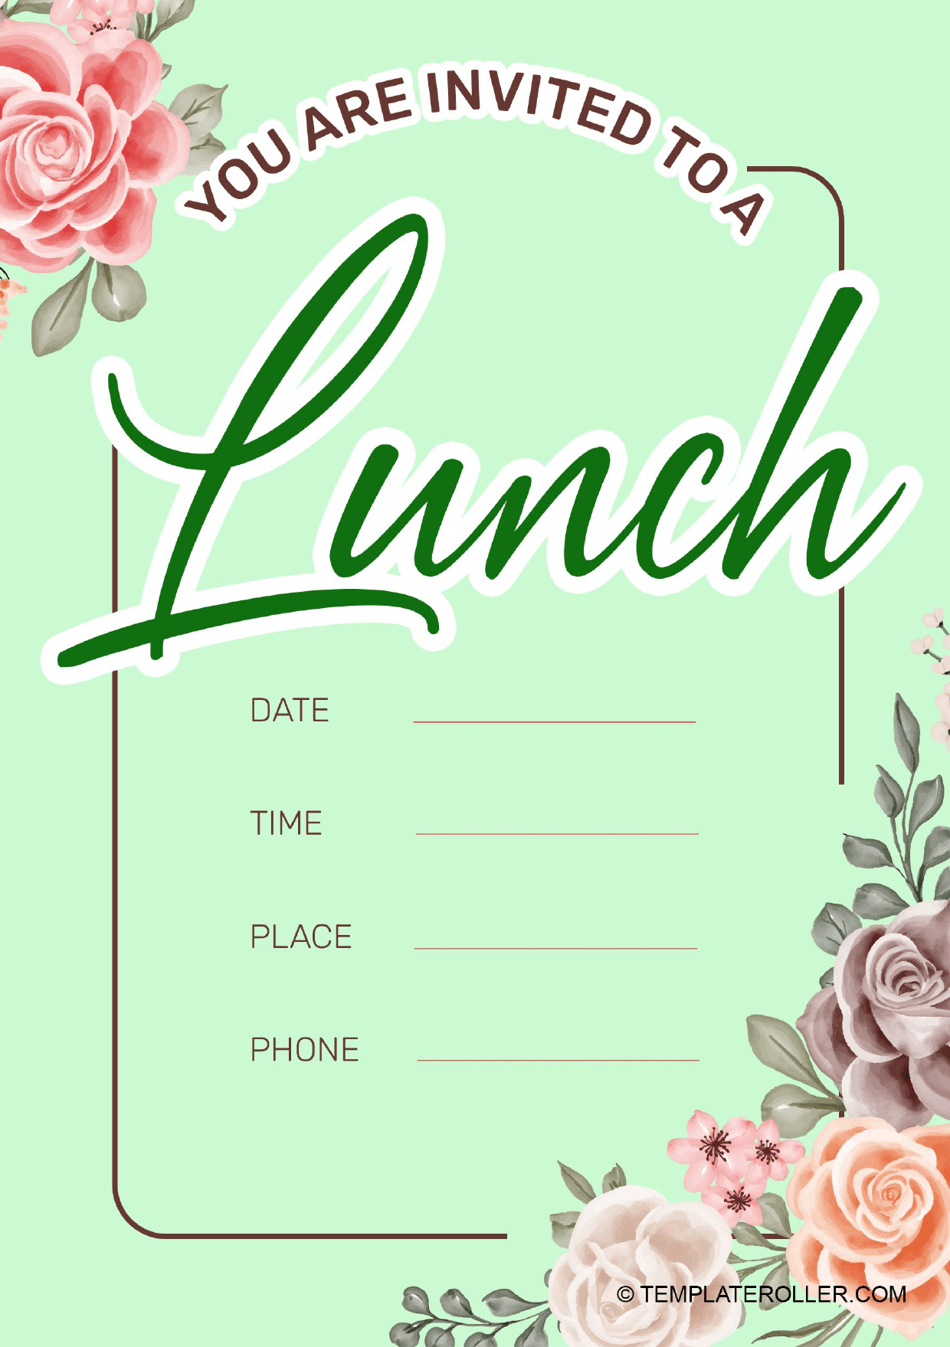 Lunch Invitation Template in Light Green - Preview Image